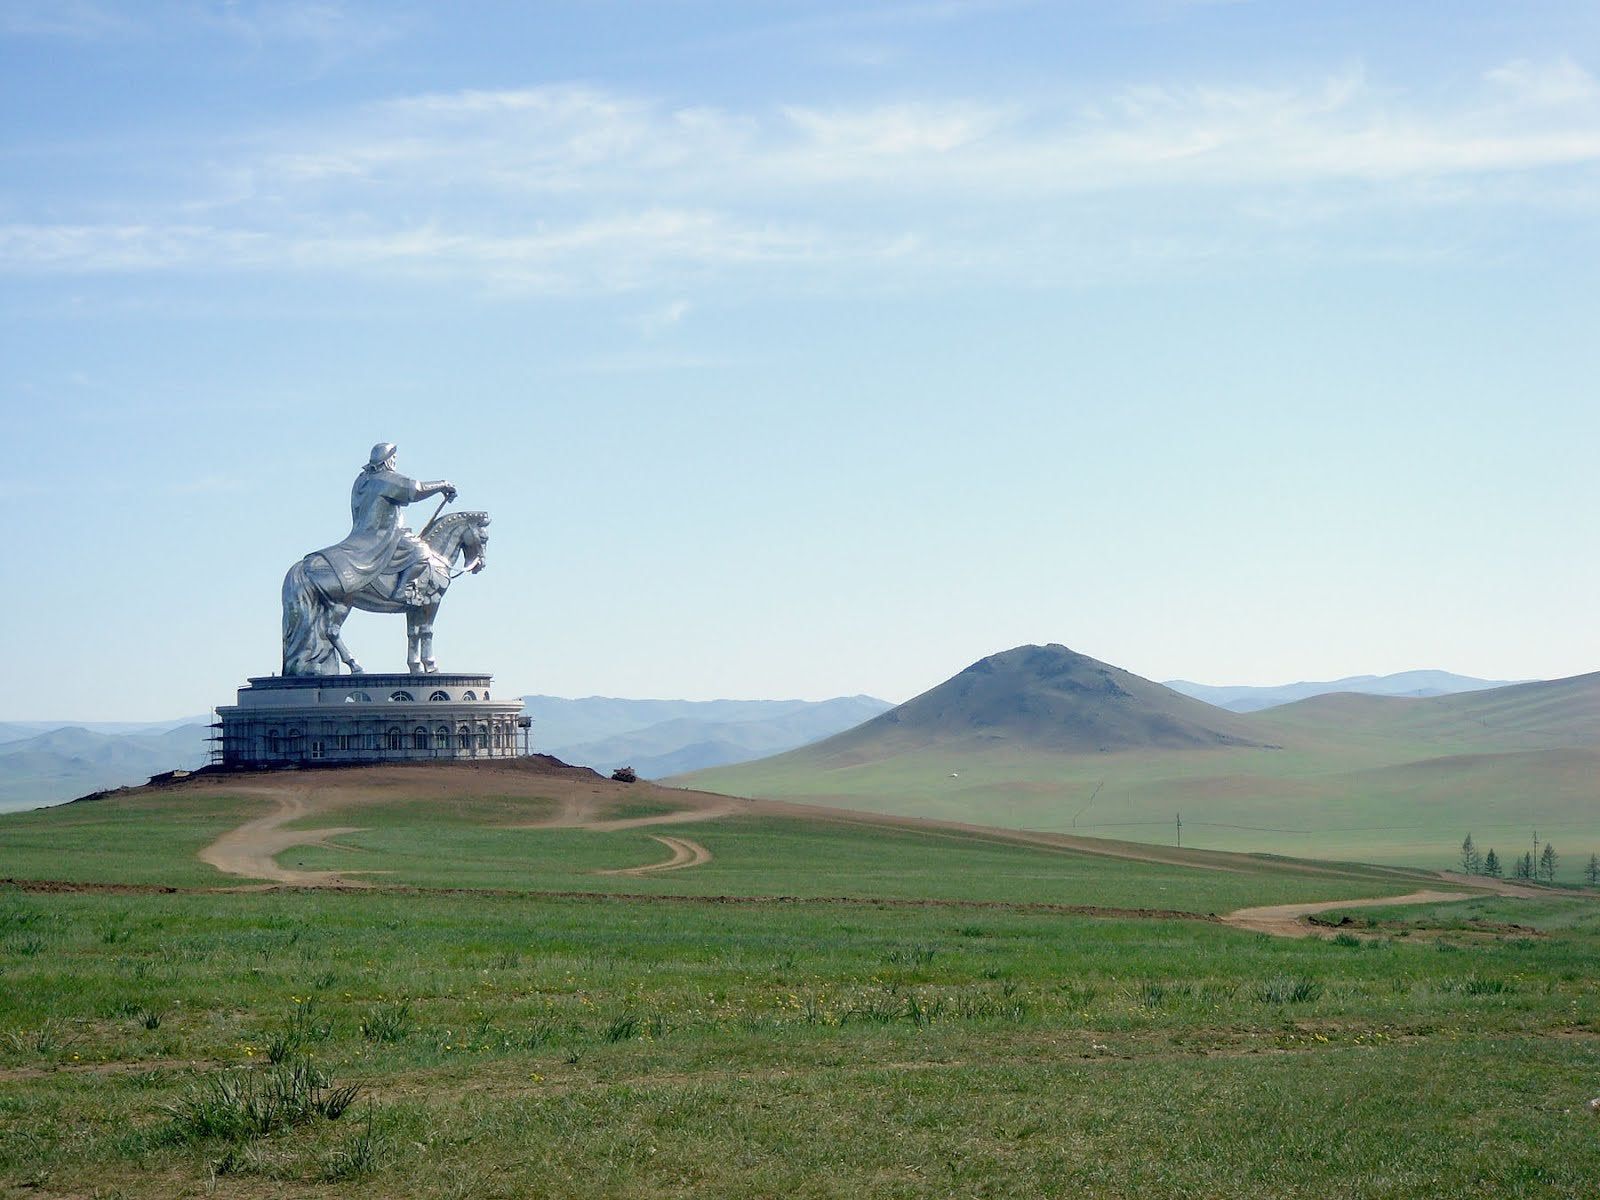 Genghis Khan statue on the Mongolian steepes